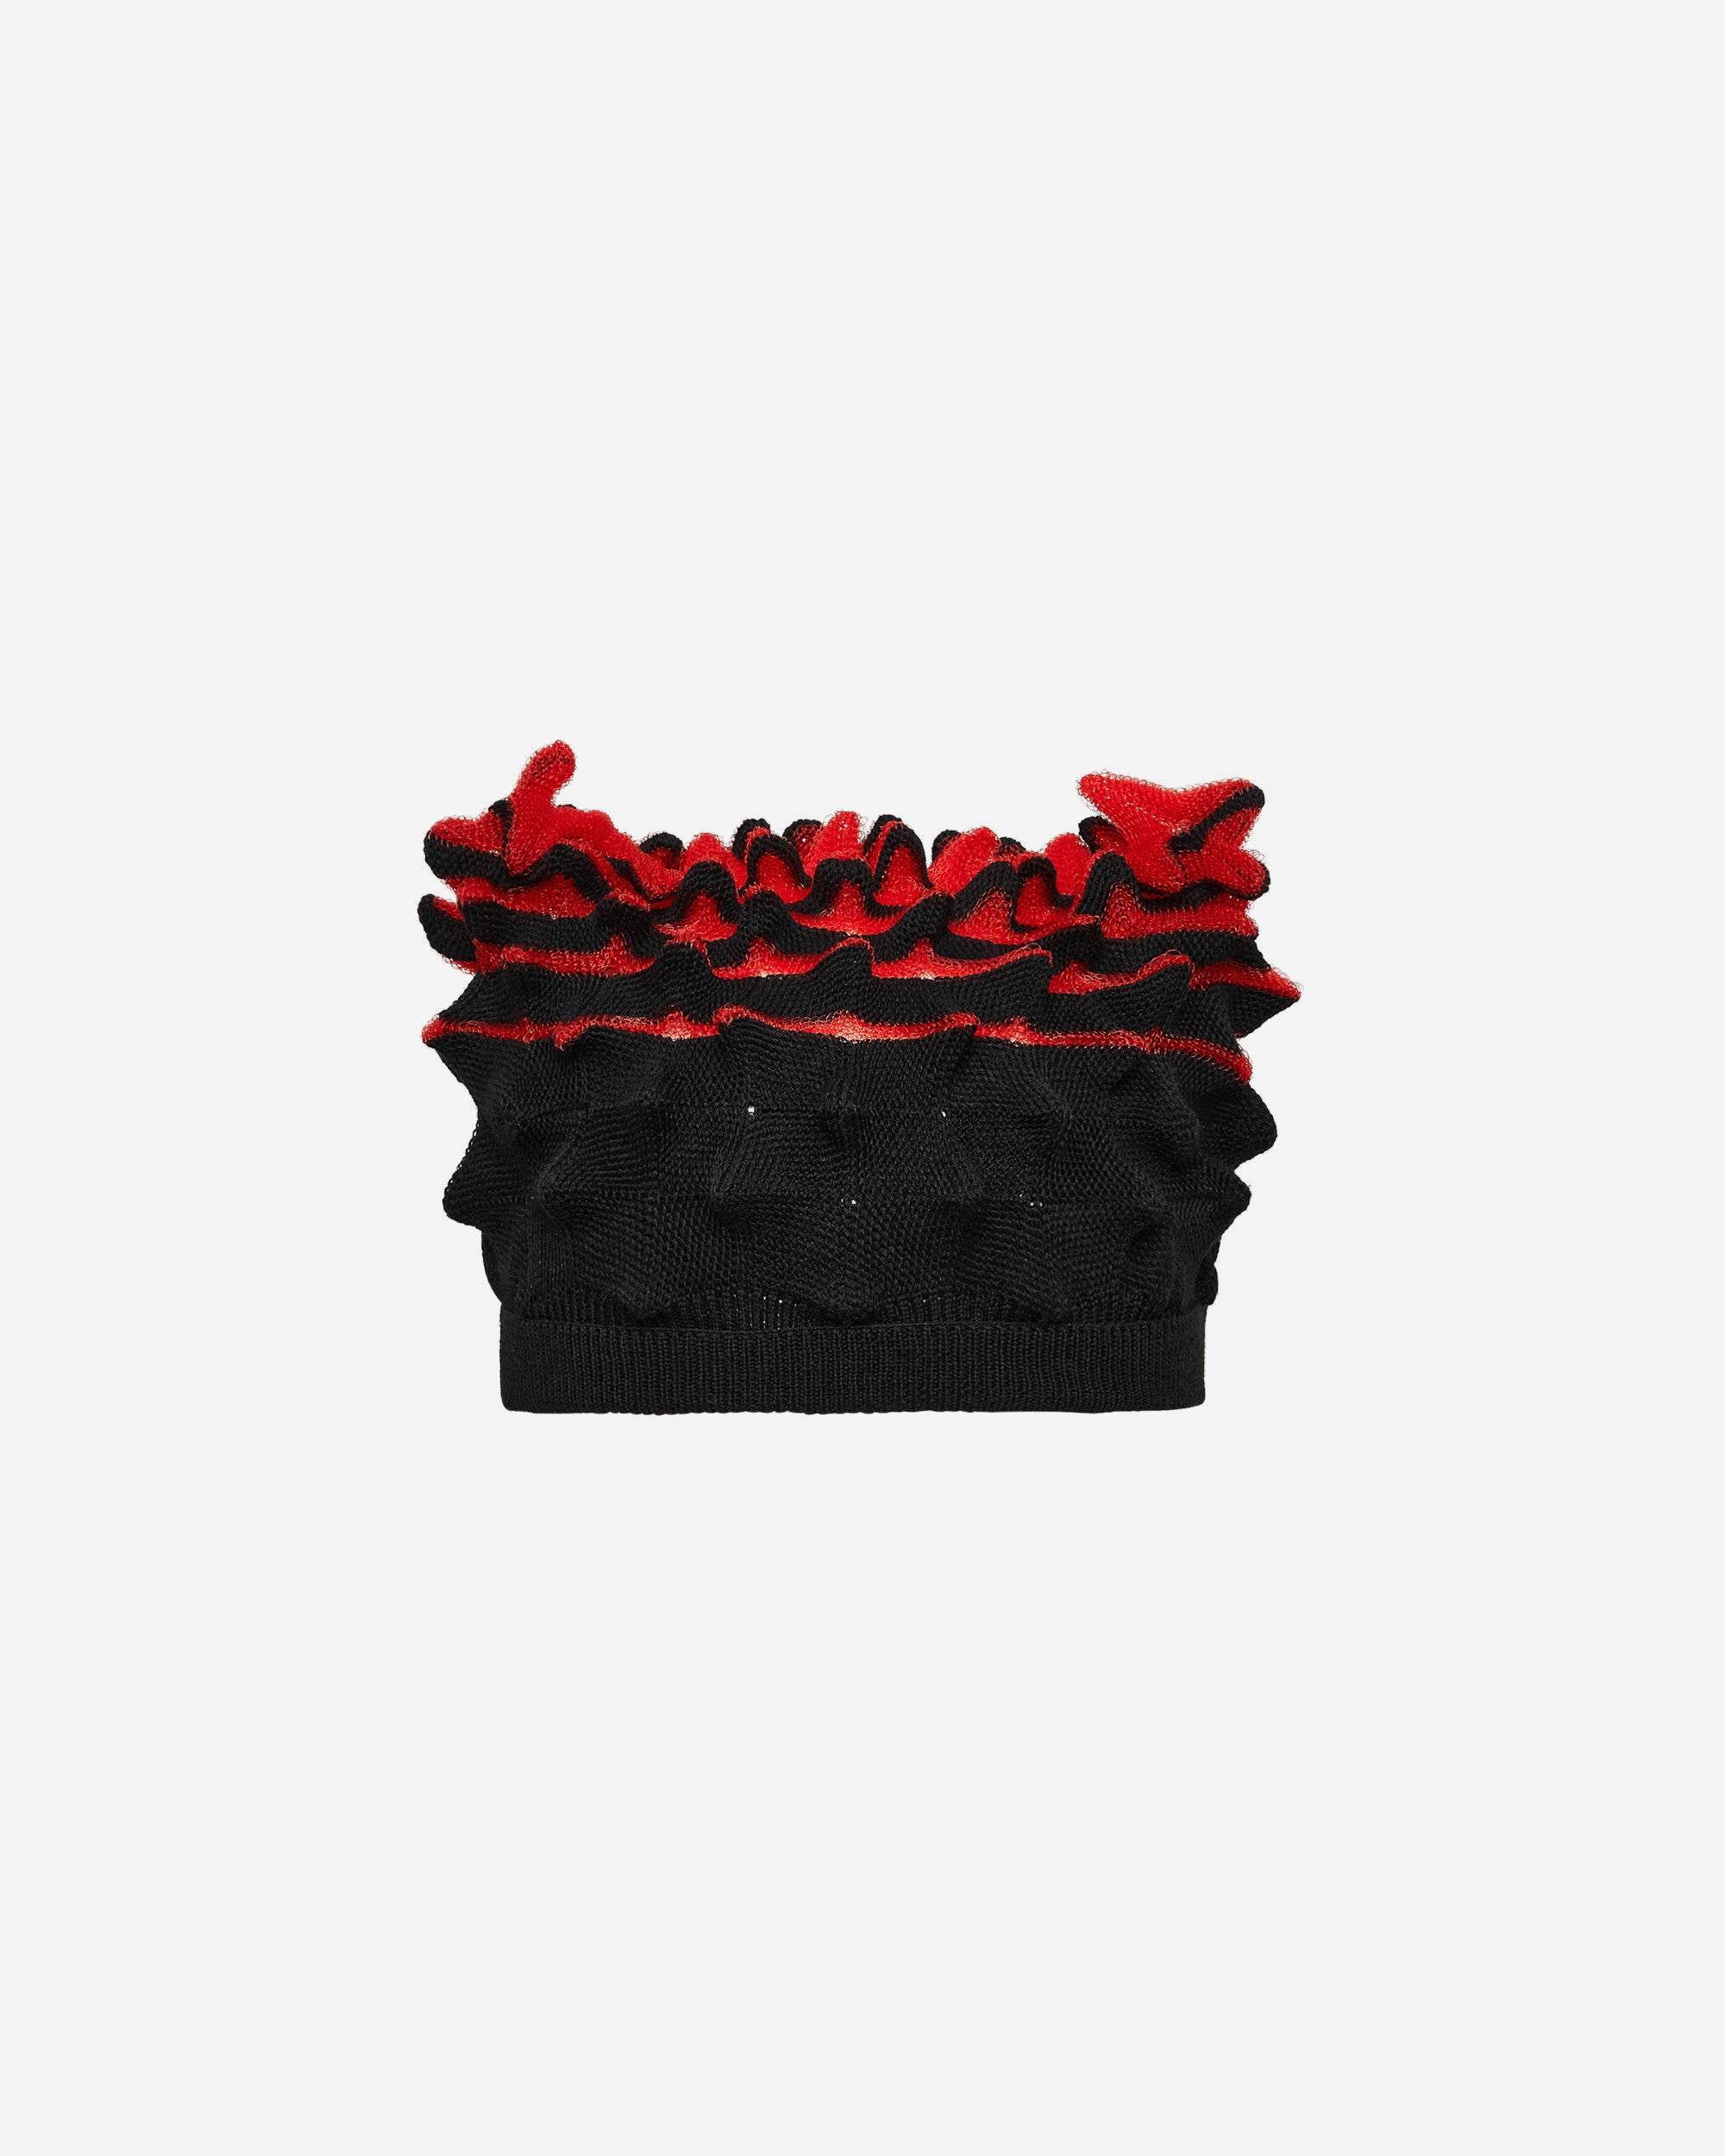 Chet Lo Wmns Spiky Beanie Exclusive Black/Red Hats Beanies FW23CL54 1